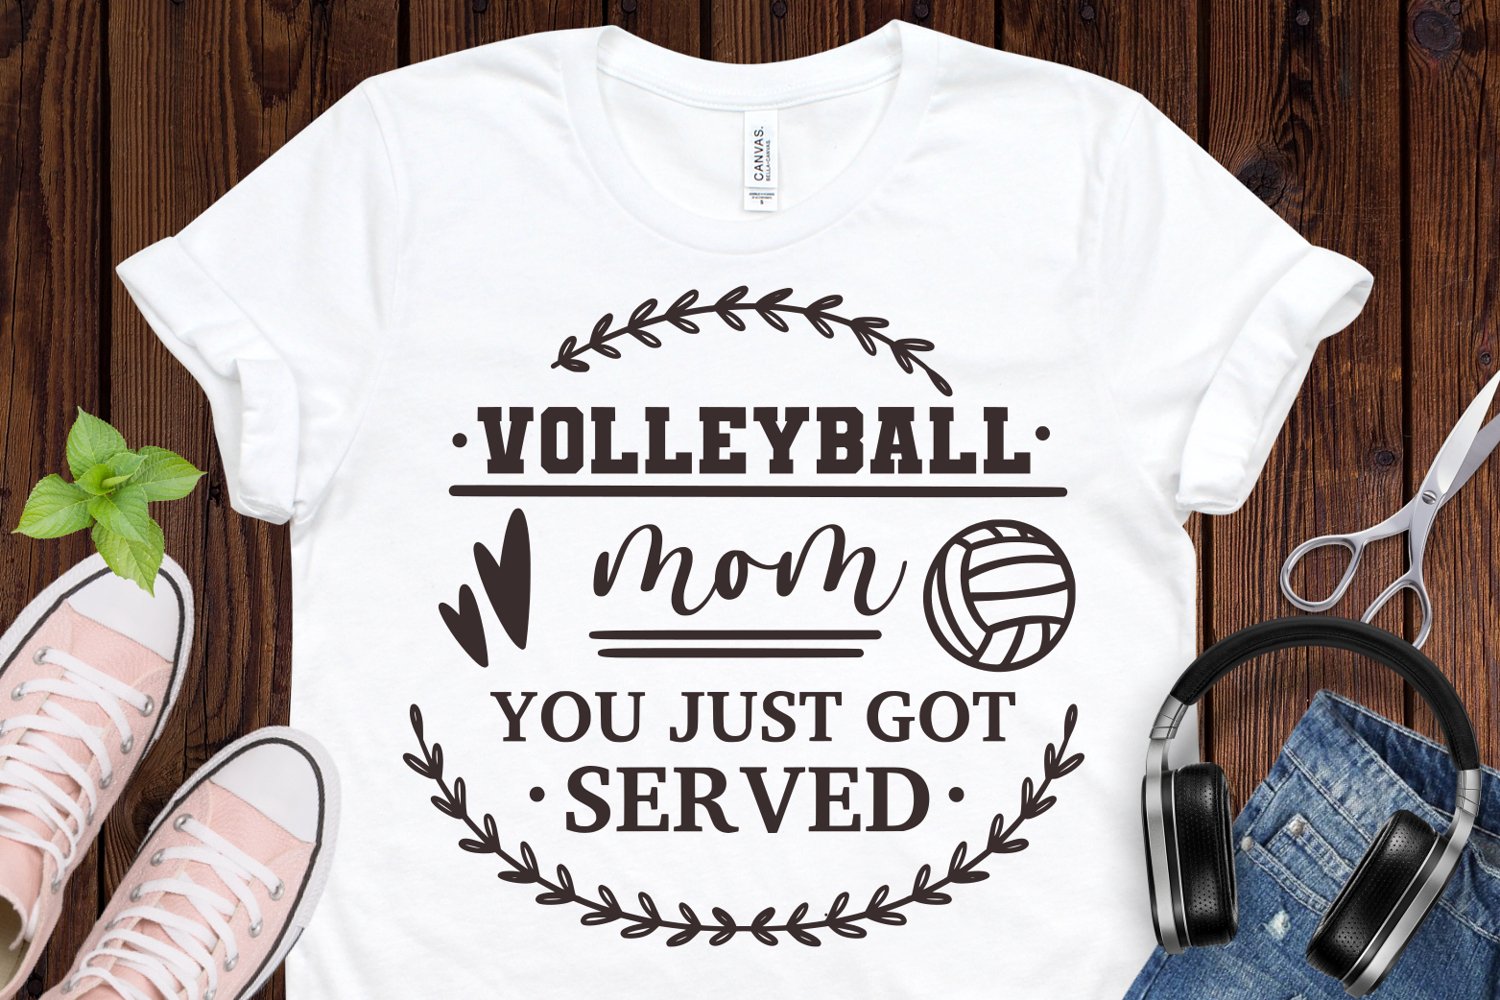 Volleyball mom you just got served - t-shirt design.